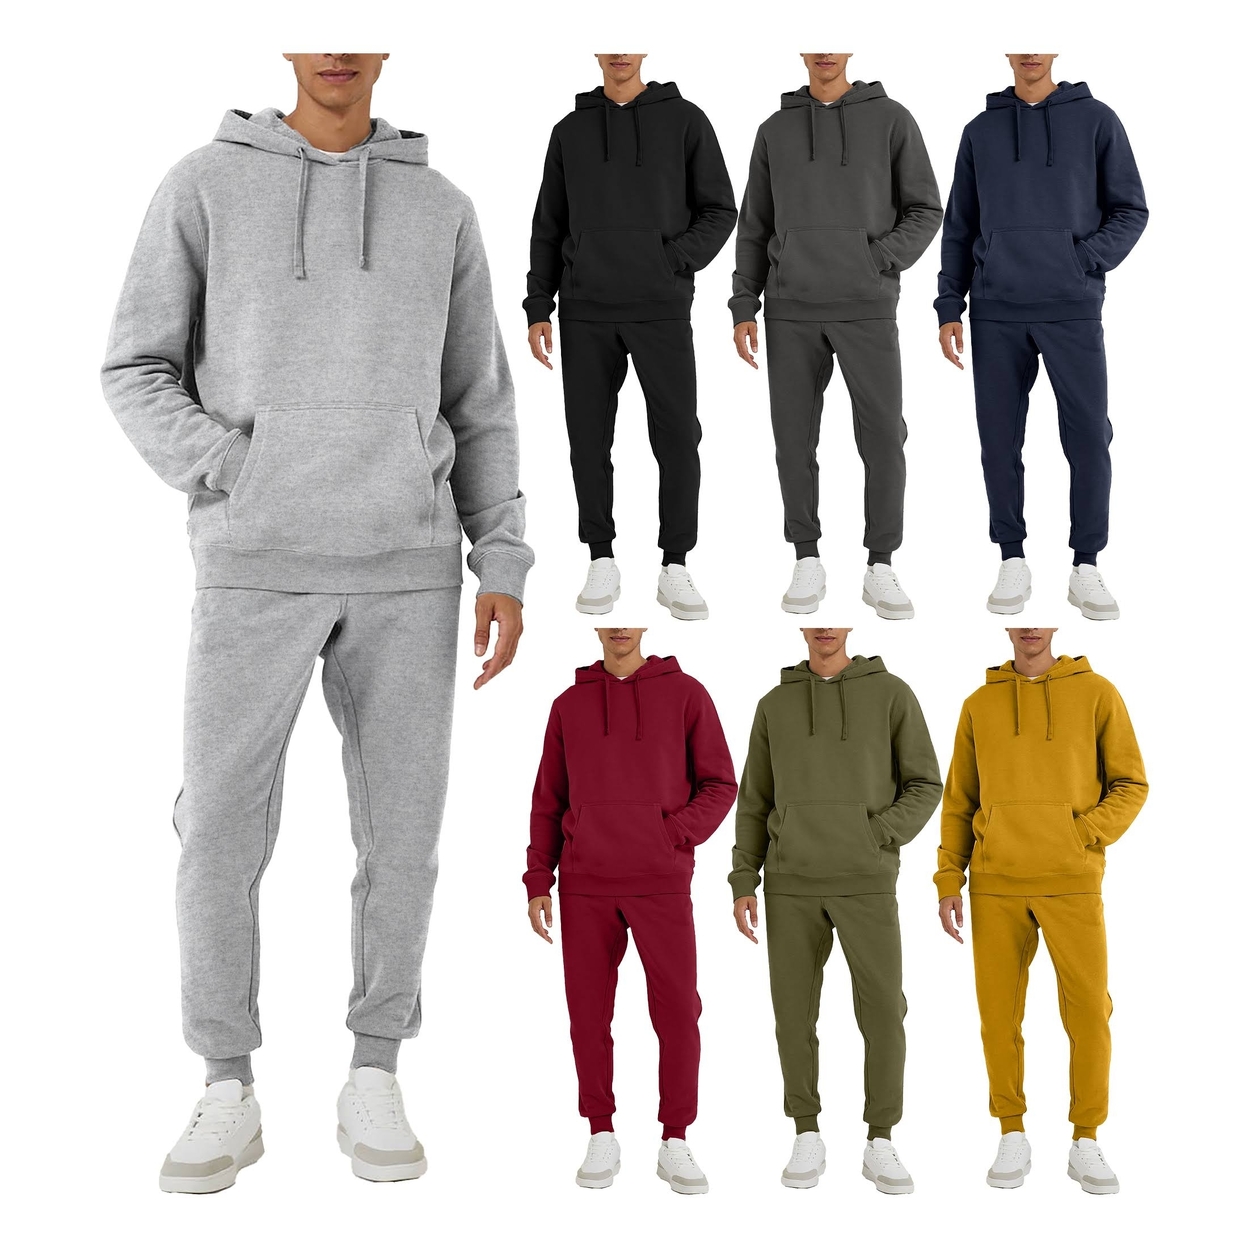 Men's Big & Tall Athletic Active Jogging Winter Warm Fleece Lined Pullover Tracksuit Set - Grey, Small